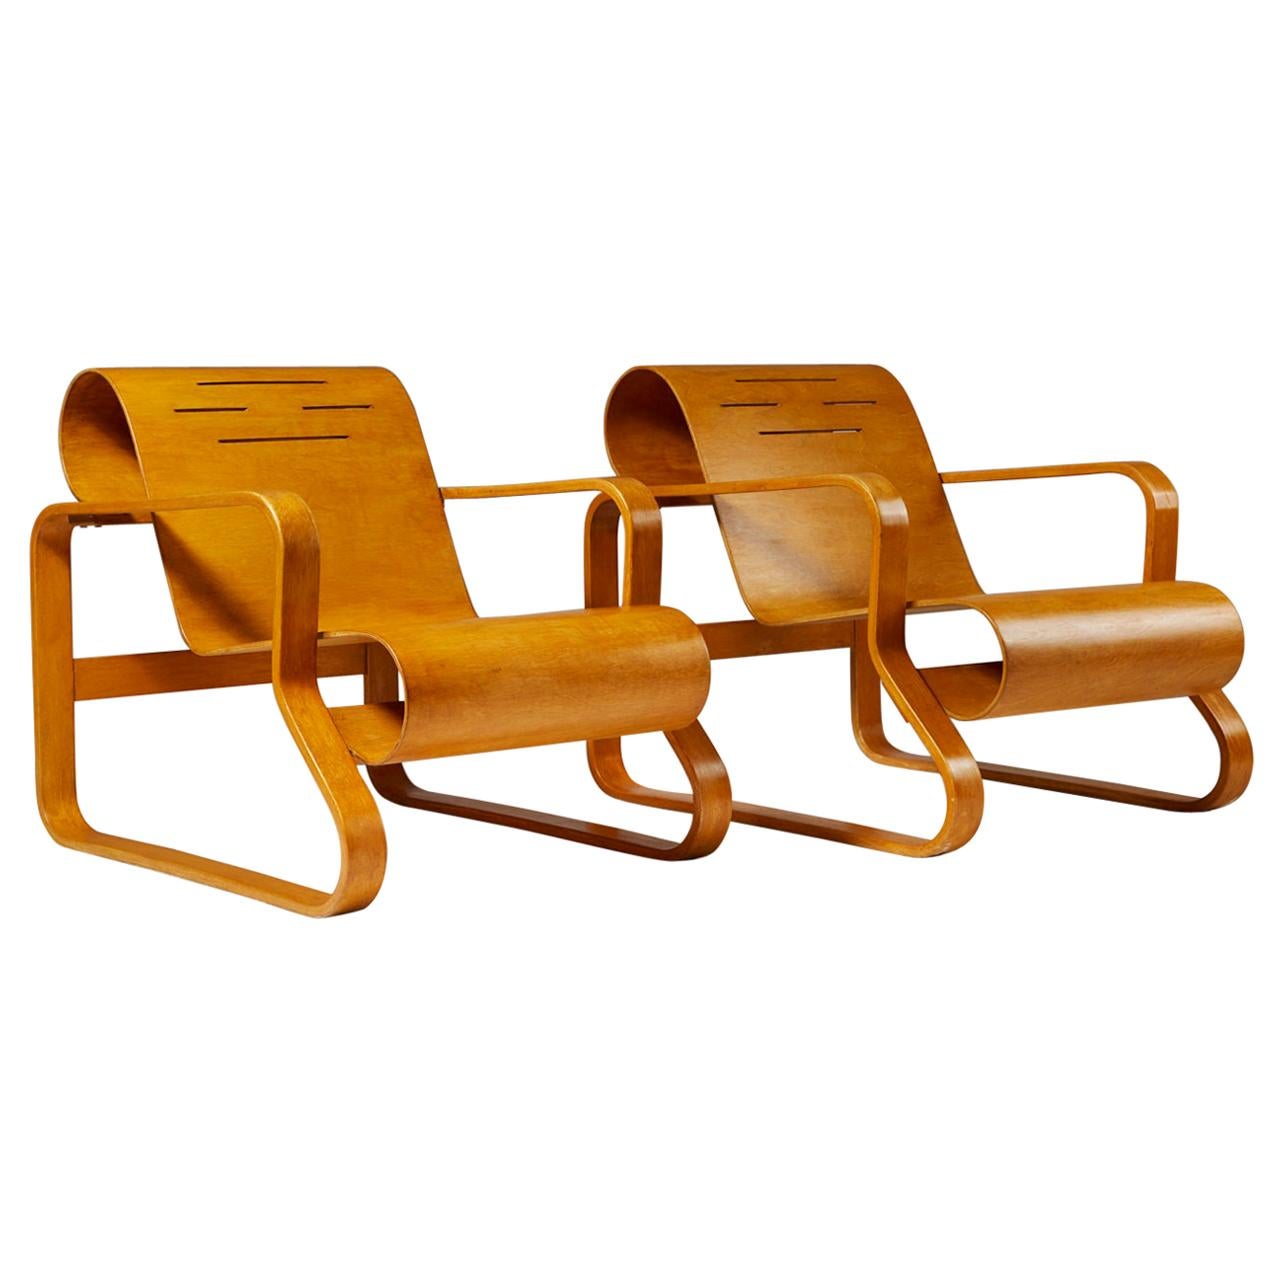 Pair of Armchairs Paimio Number 41 Designed by Alvar Aalto for Artek, Finland